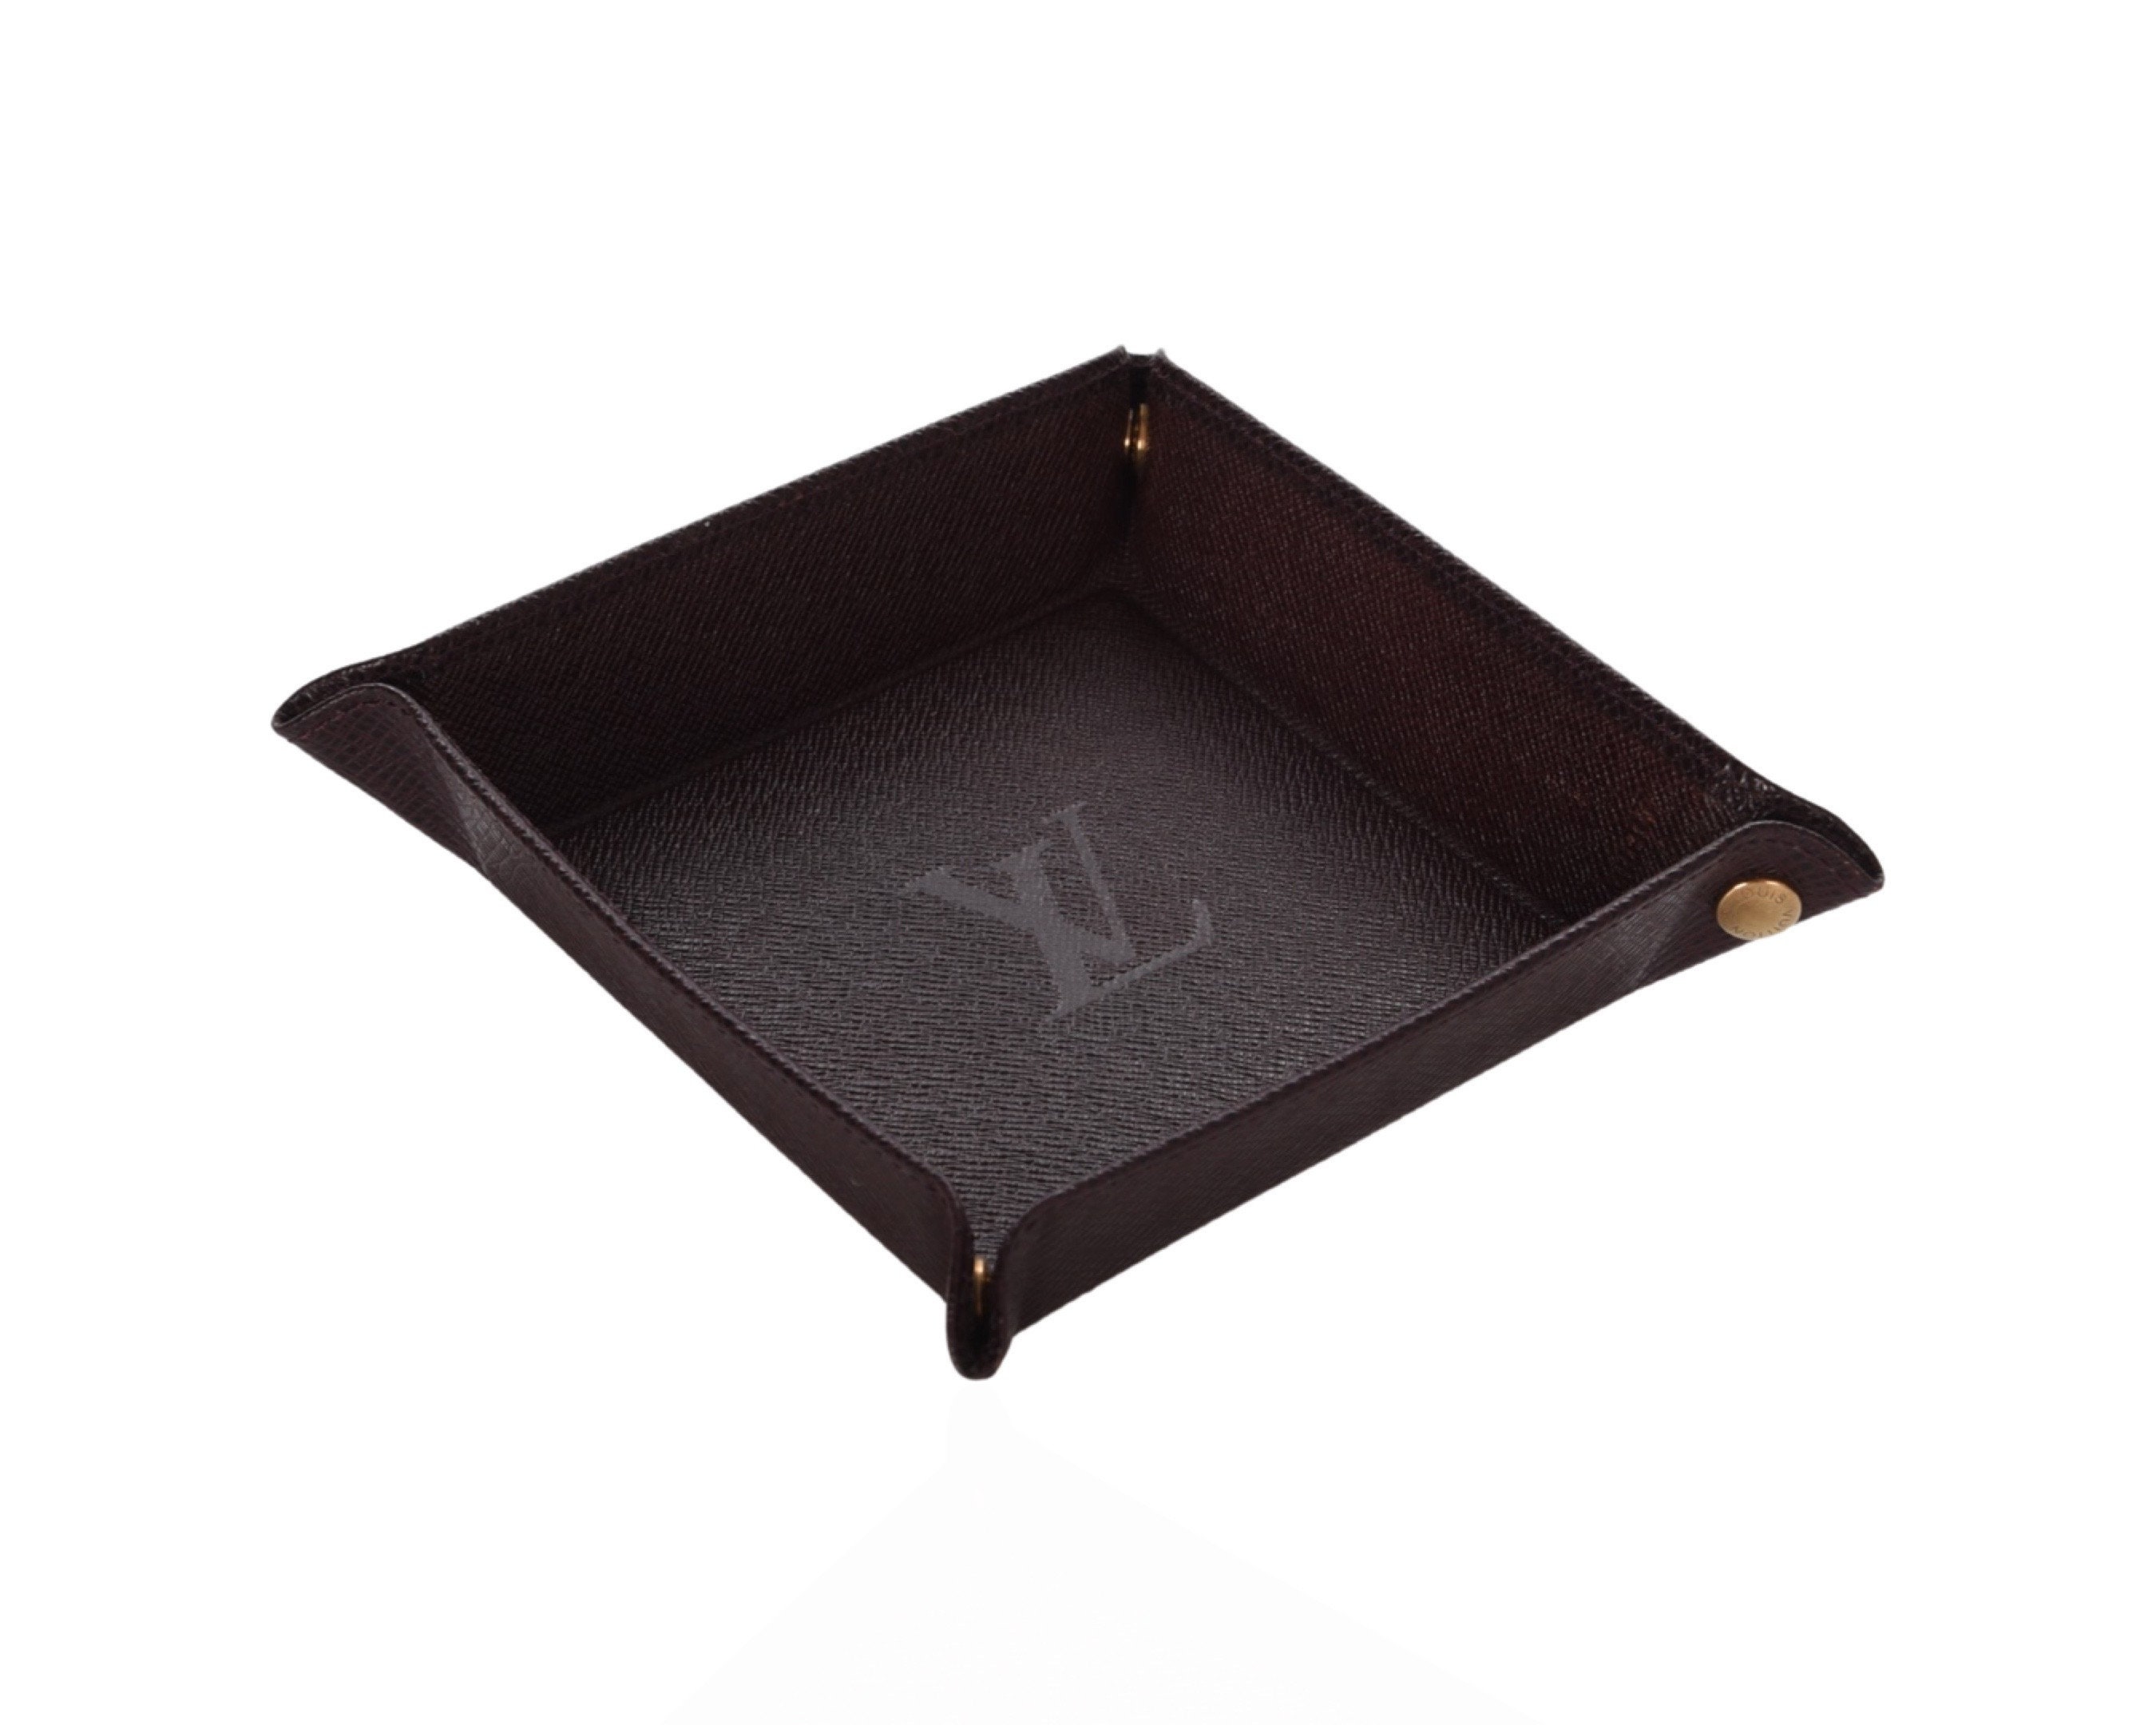 Buy Louis Vuitton Tray Online In India -  India